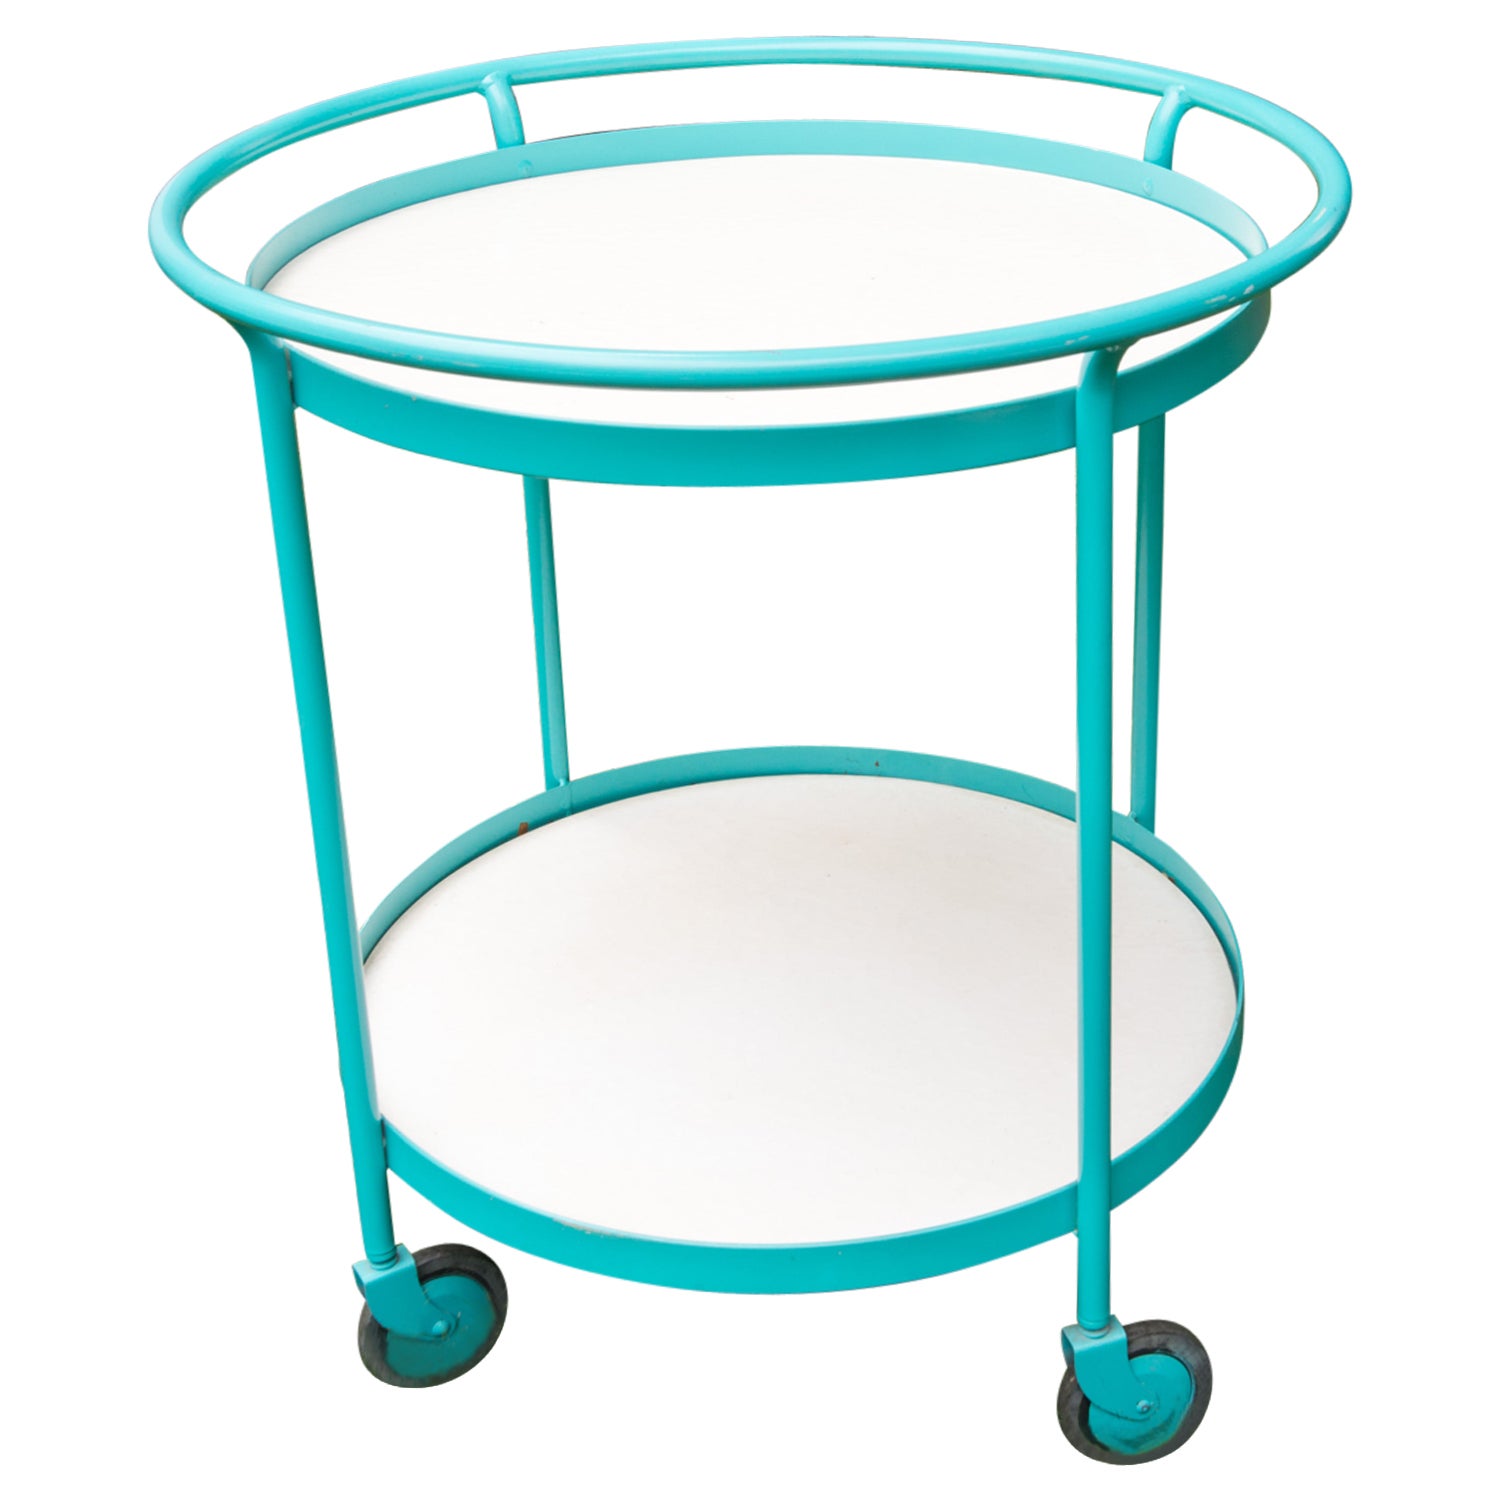 1960s Tropitone Turquoise Circular Cart For Sale